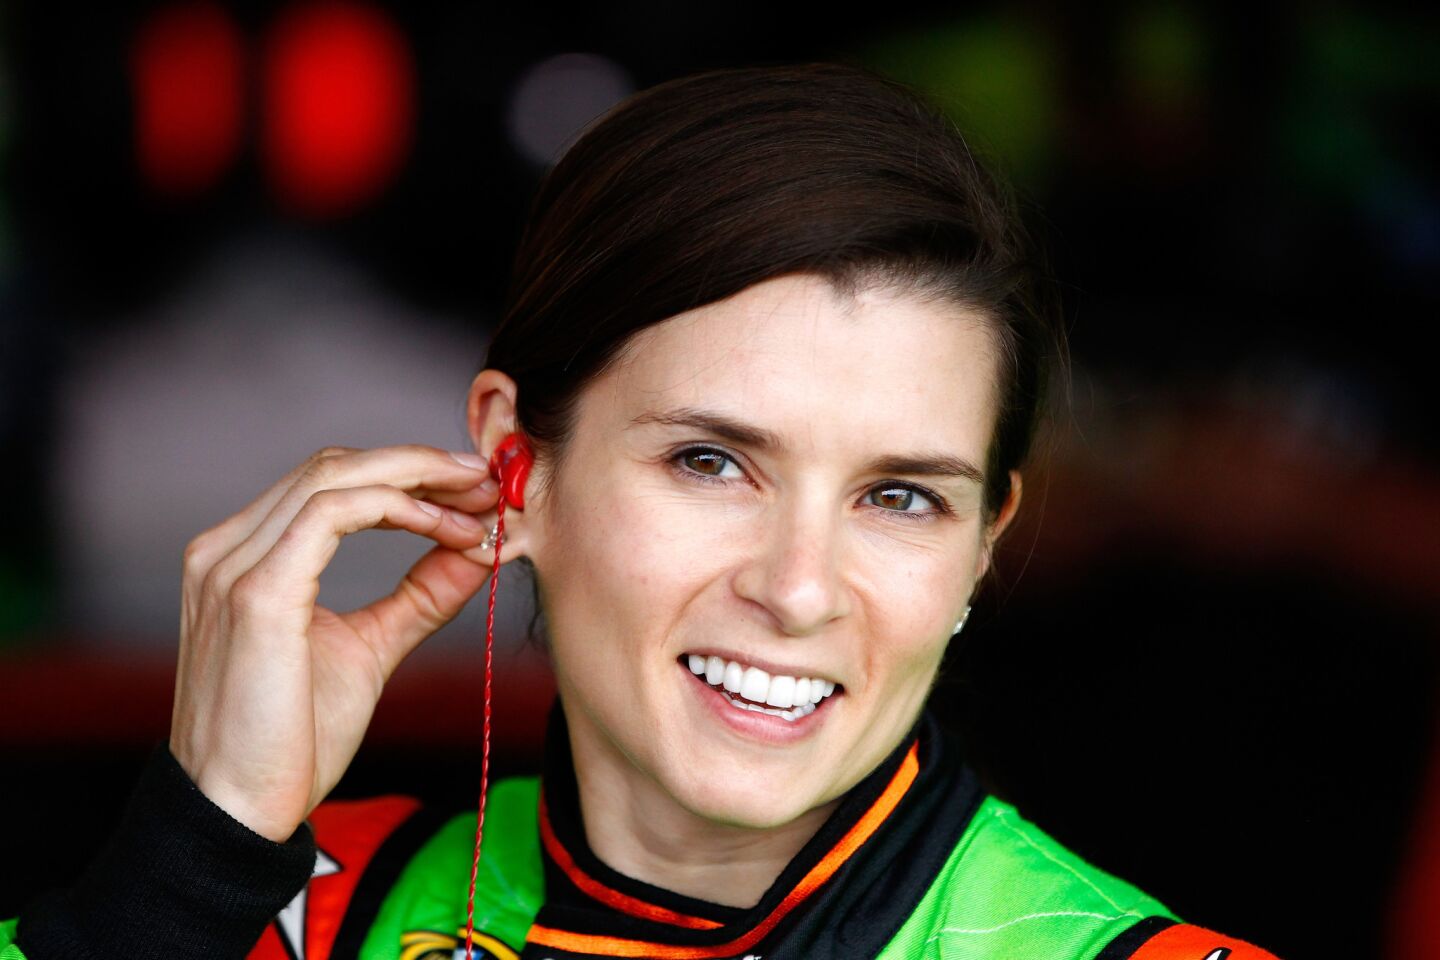 Where you've seen her: Going very, very fast around a racetrack Why we love her: Patrick may be the best-known female auto racer in the world, and has the record high finish for a woman at the Indianapolis 500.